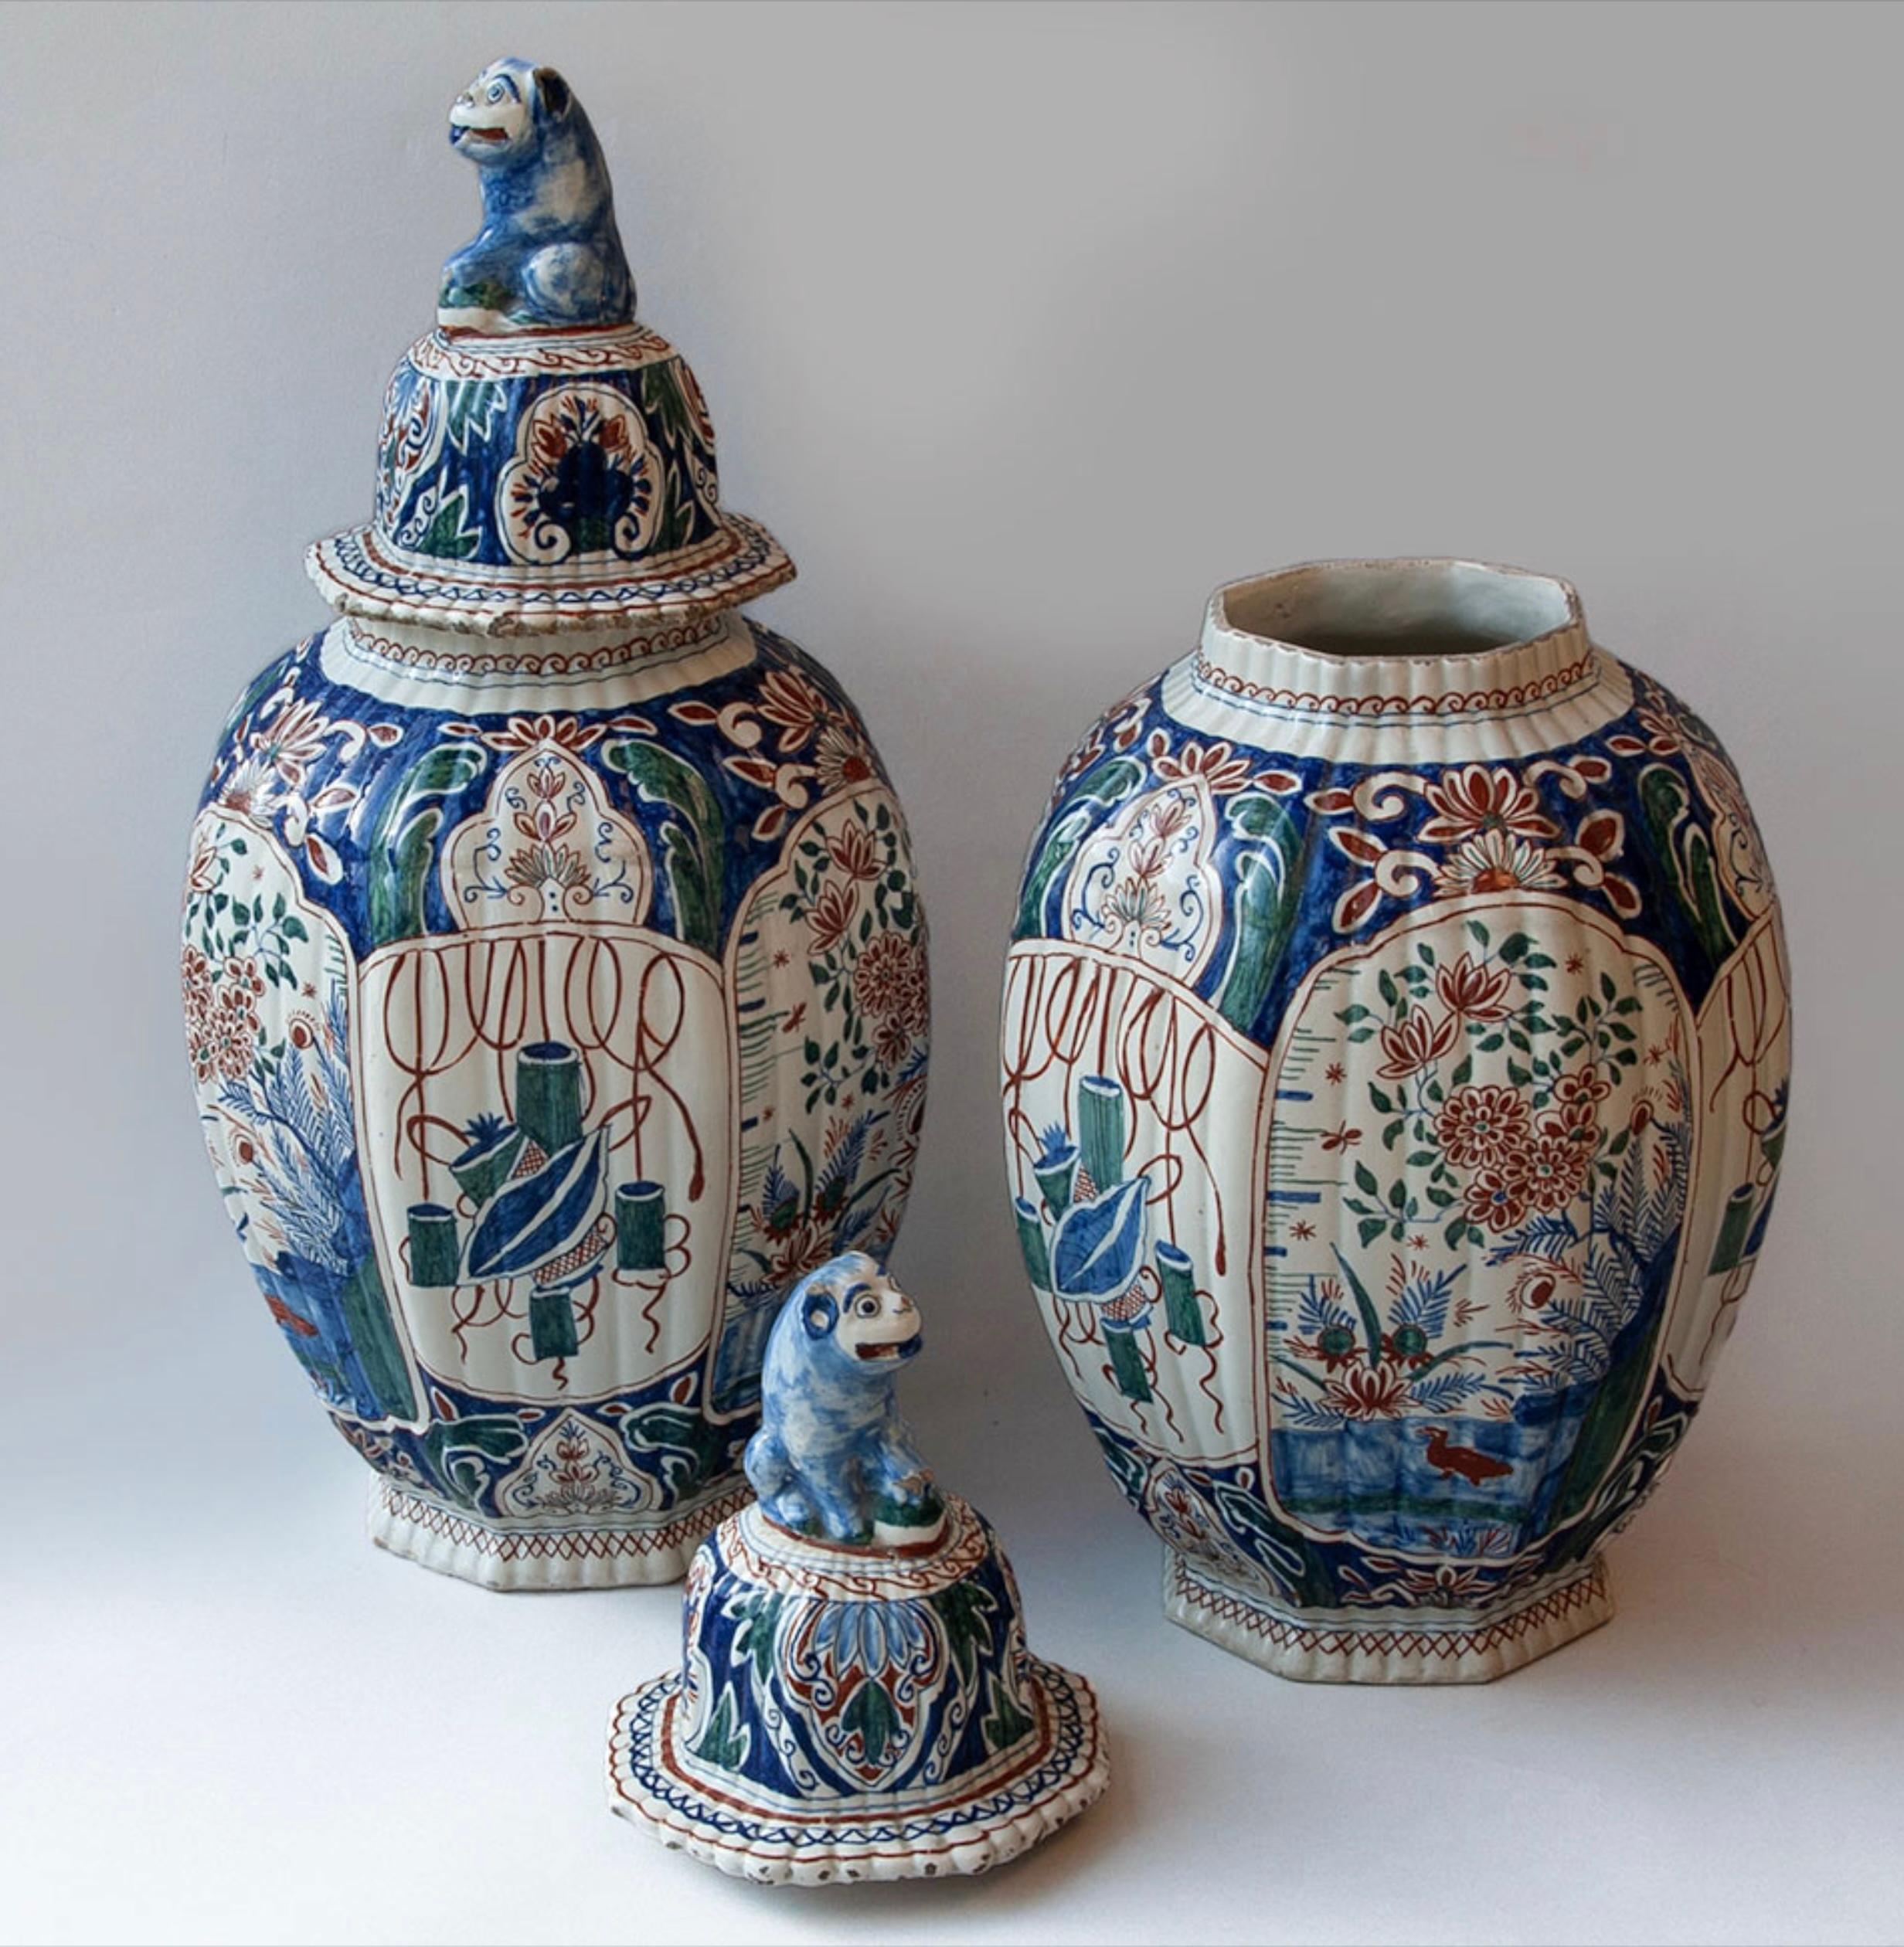 Pair of 19th Century Dutch Antique Delft Polychrome Vases with Covers In Good Condition For Sale In London, GB